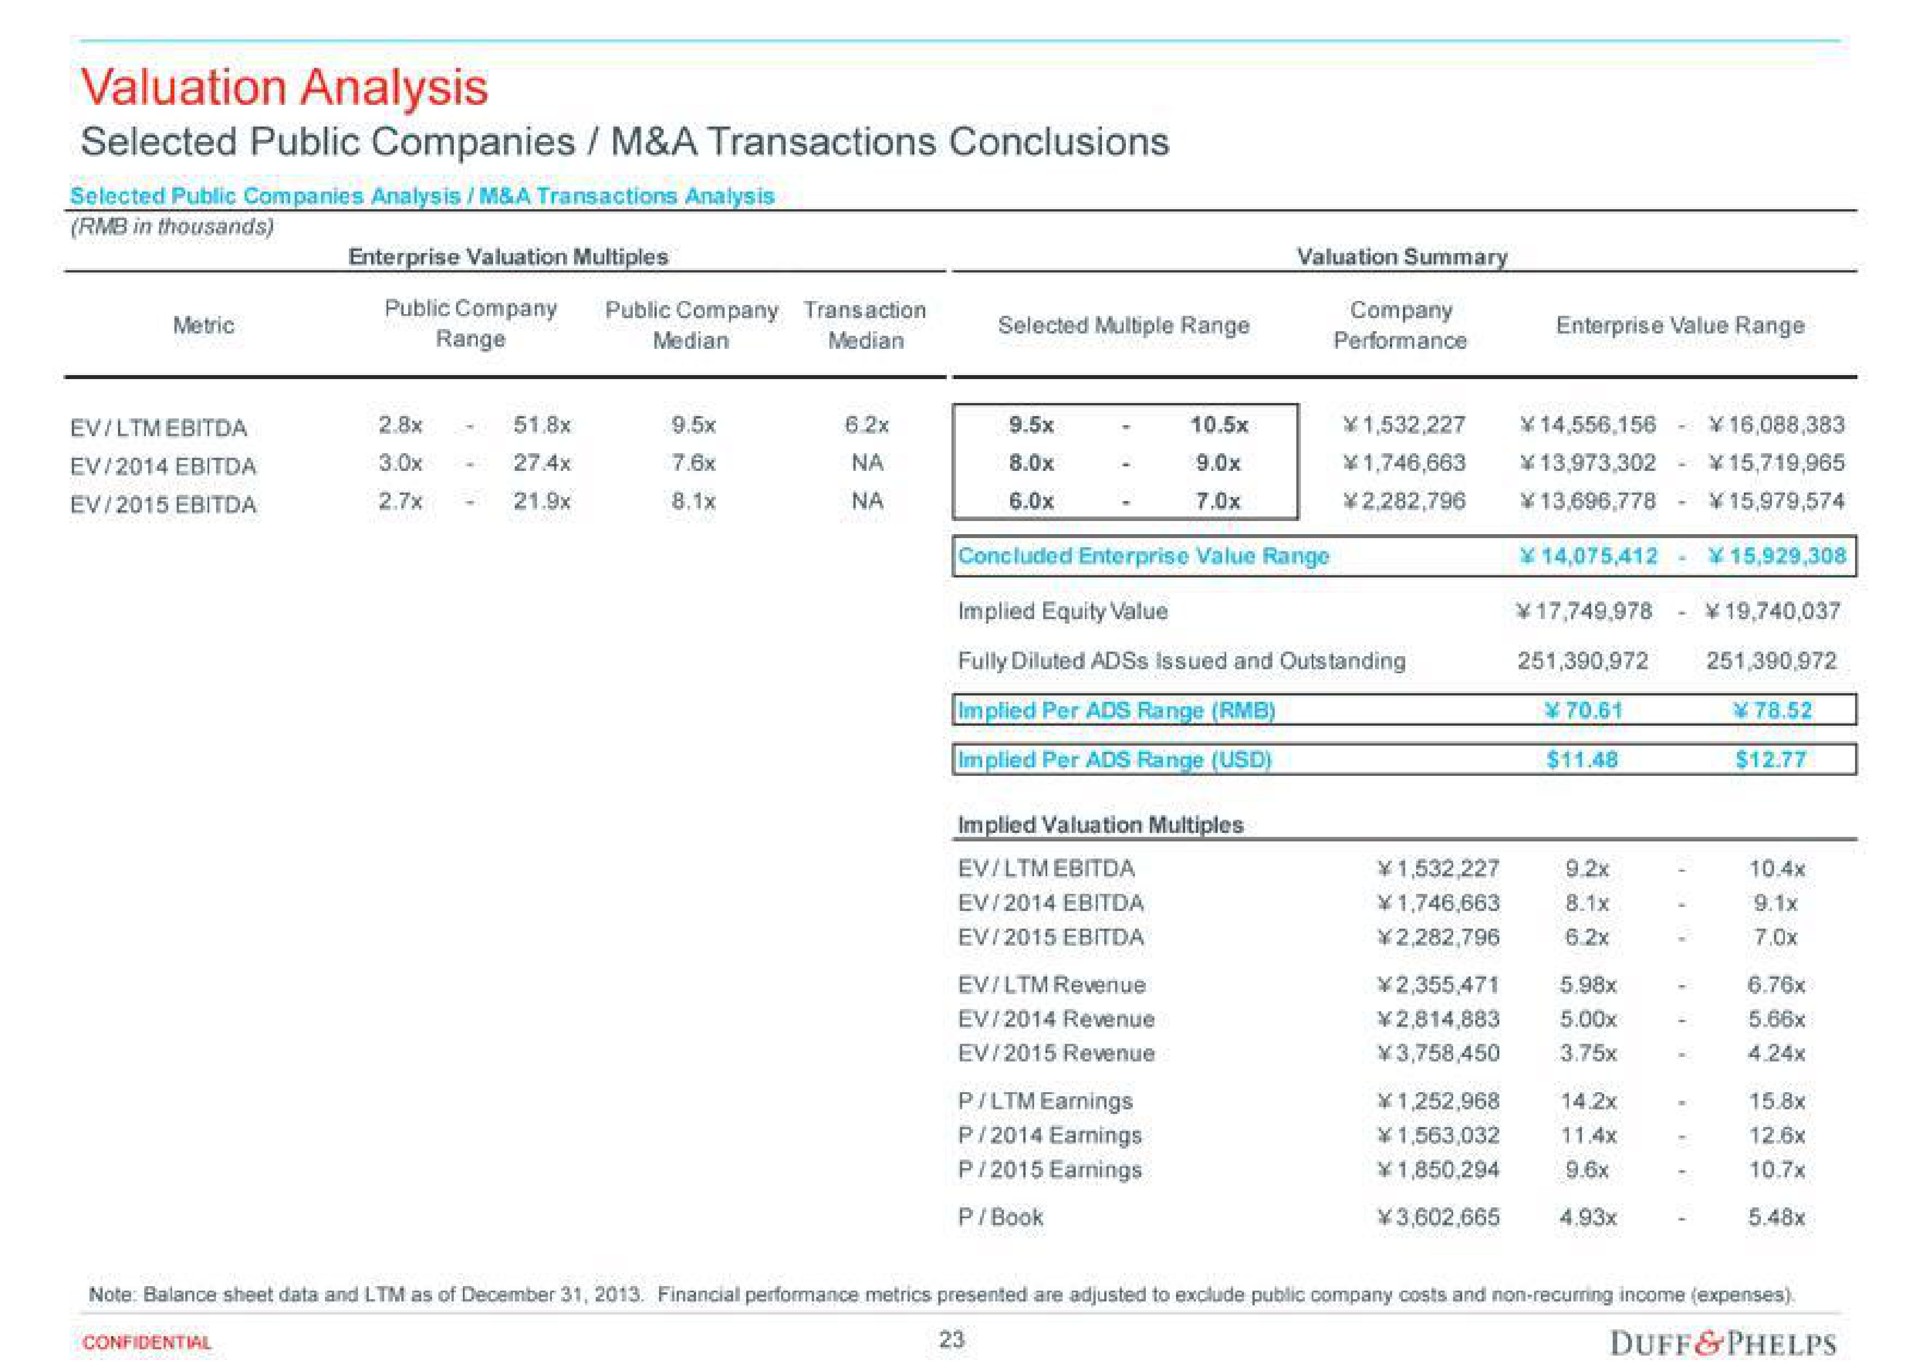 valuation analysis selected public companies a transactions conclusions metric | Duff & Phelps